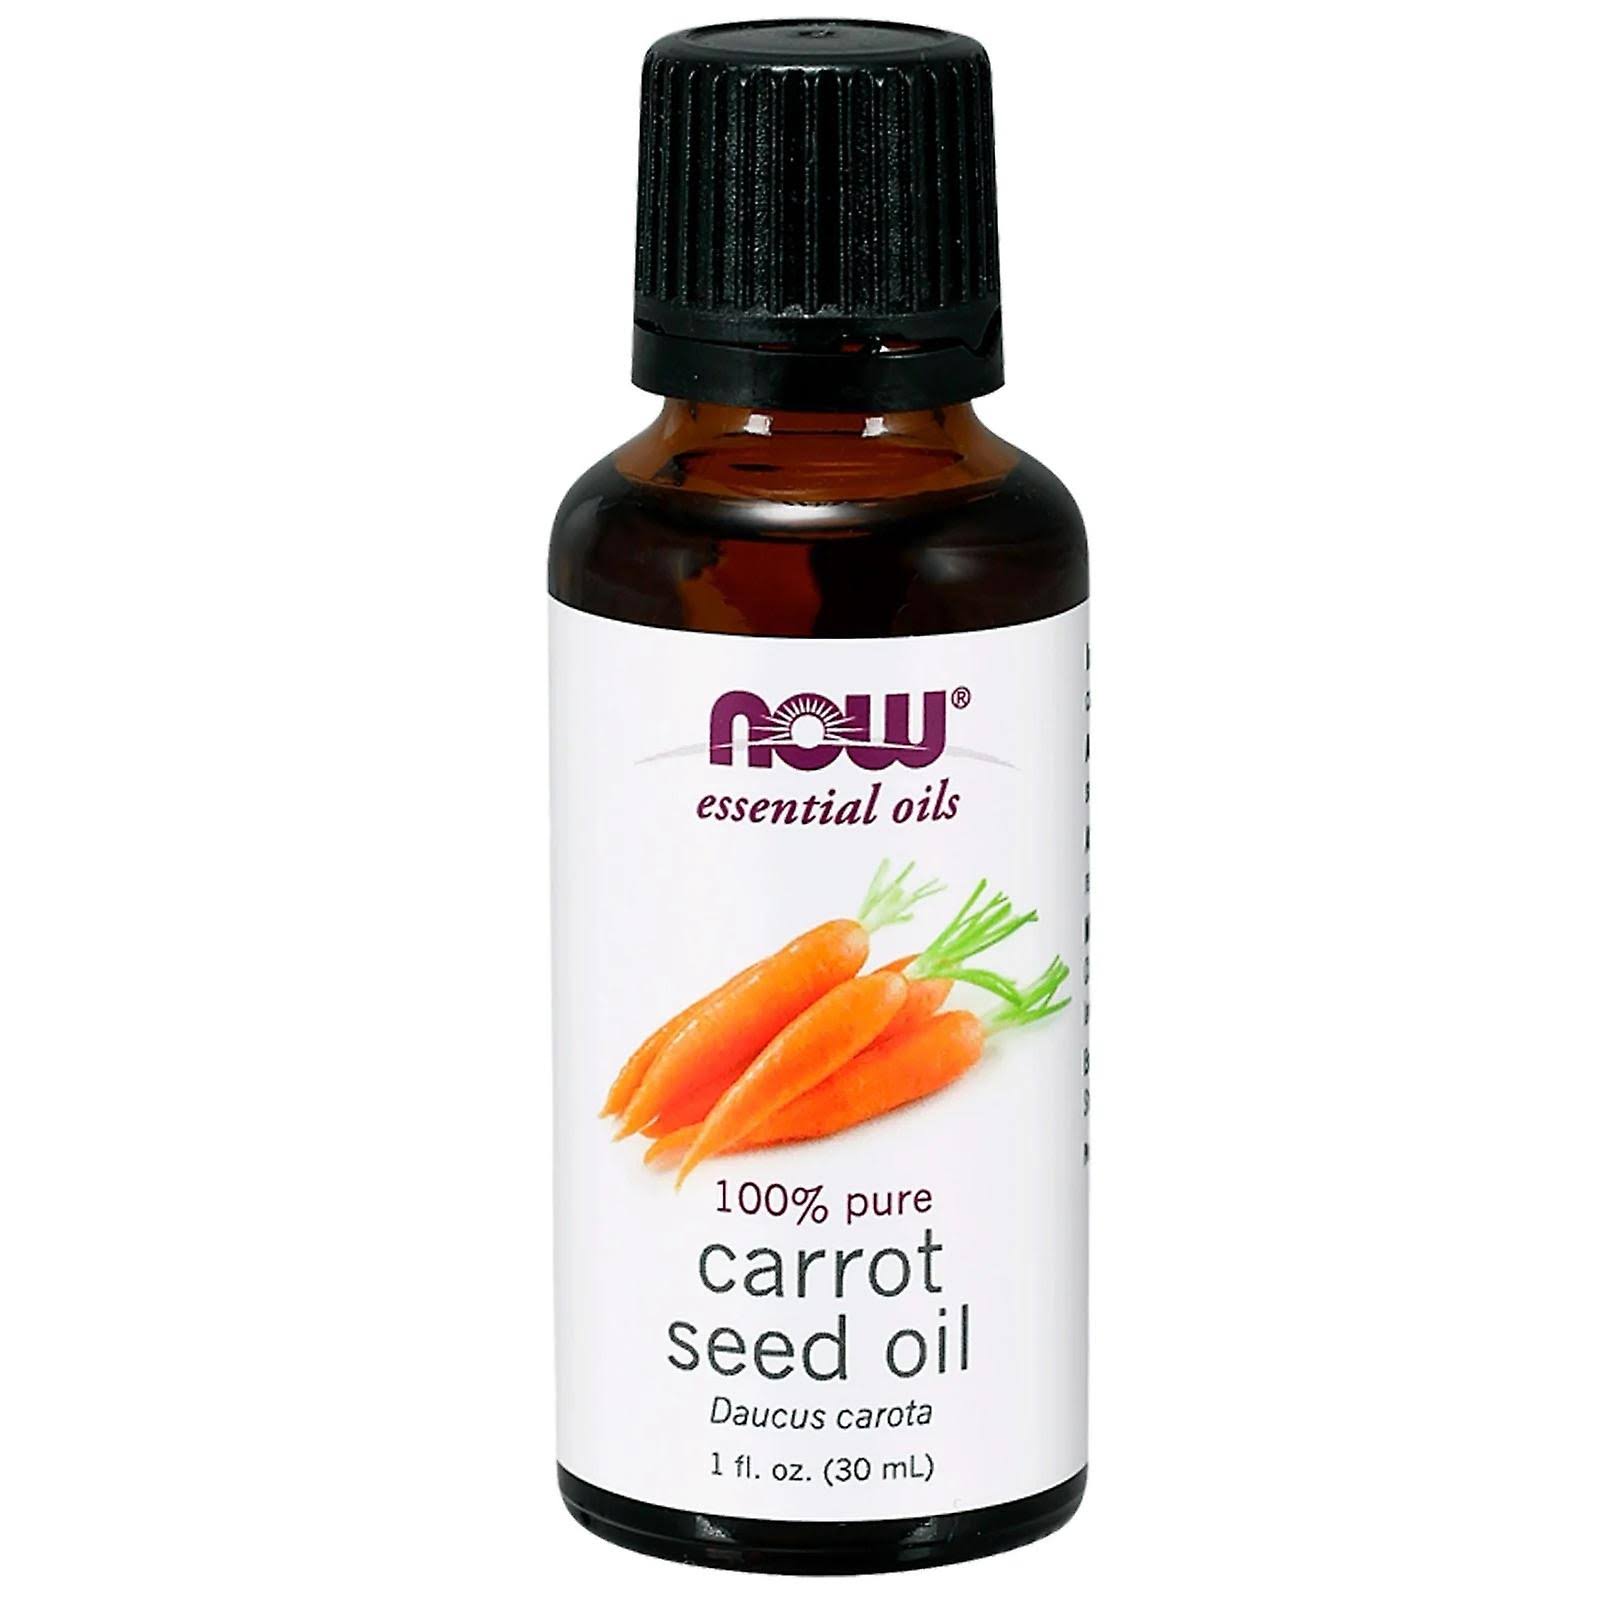 NOW FOODS ESSENTIAL OIL CARROT SEED OIL - 30 ML.